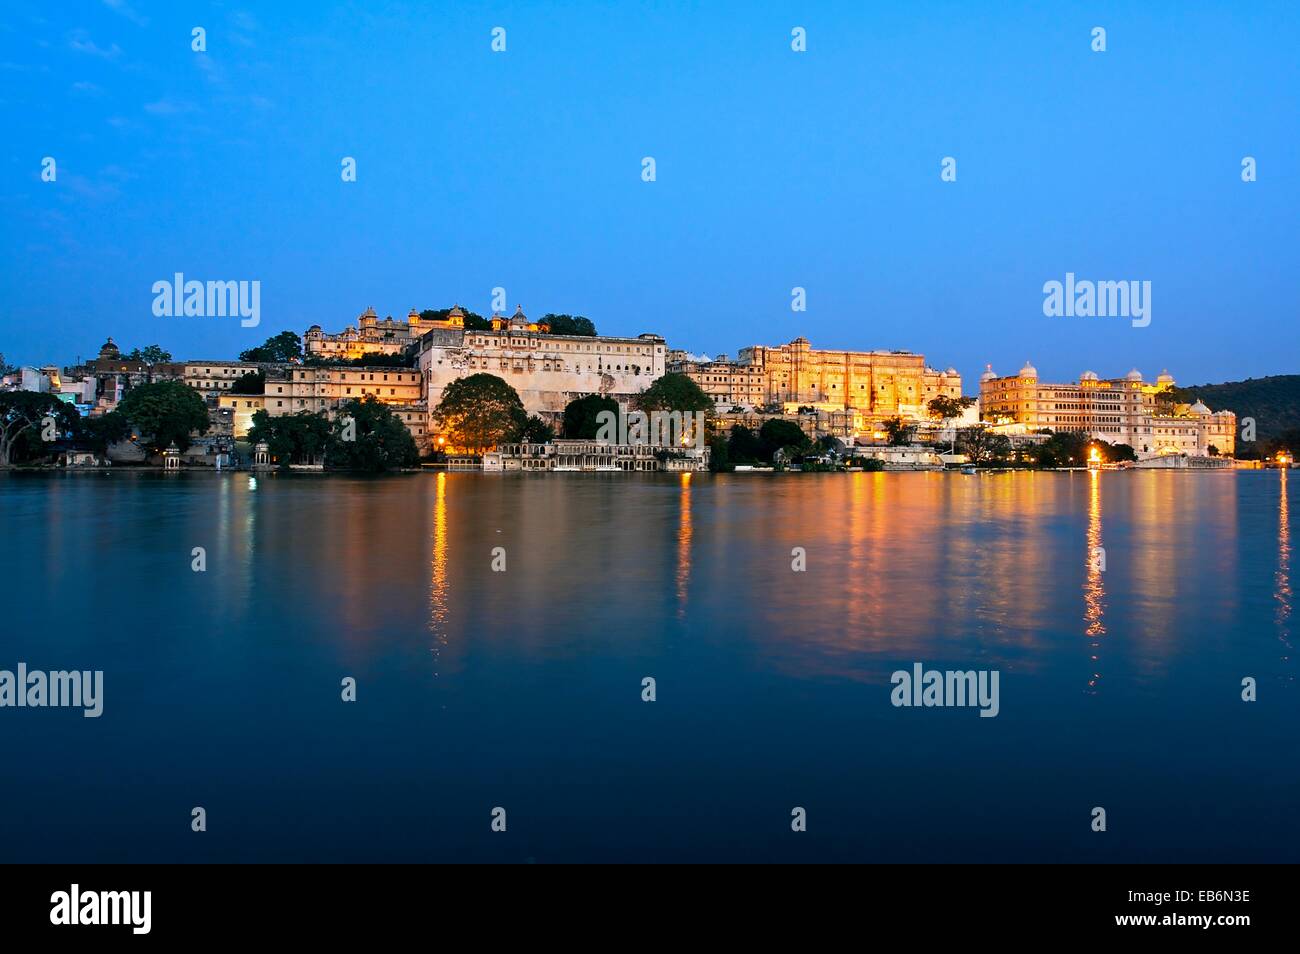 View of the city with the City Palace on the right  Lake Pichola  Udaipur  Rajasthan  India. Stock Photo